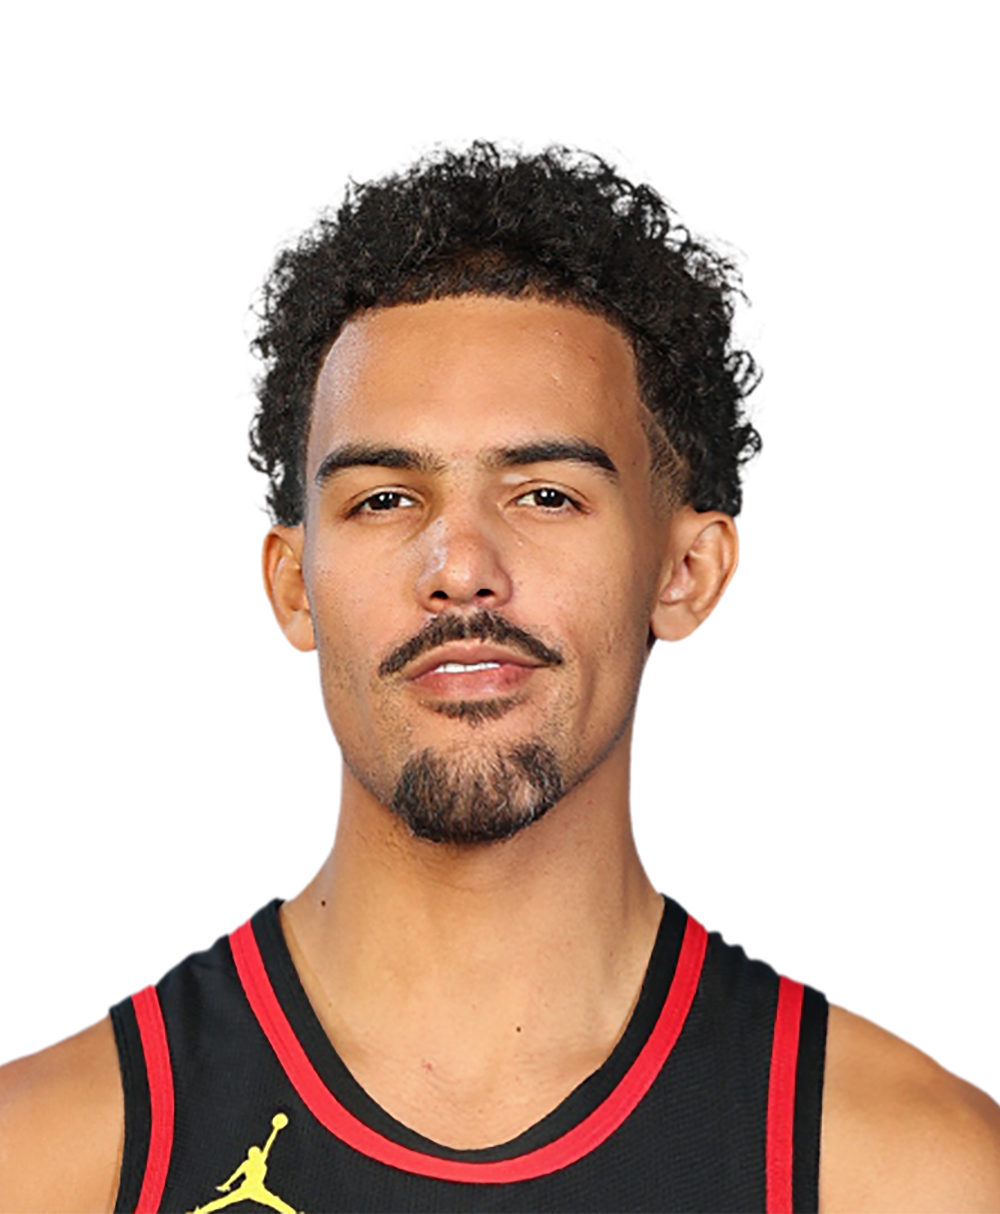 Trae Young finally showed up in Game 3, sent the series back to Boston